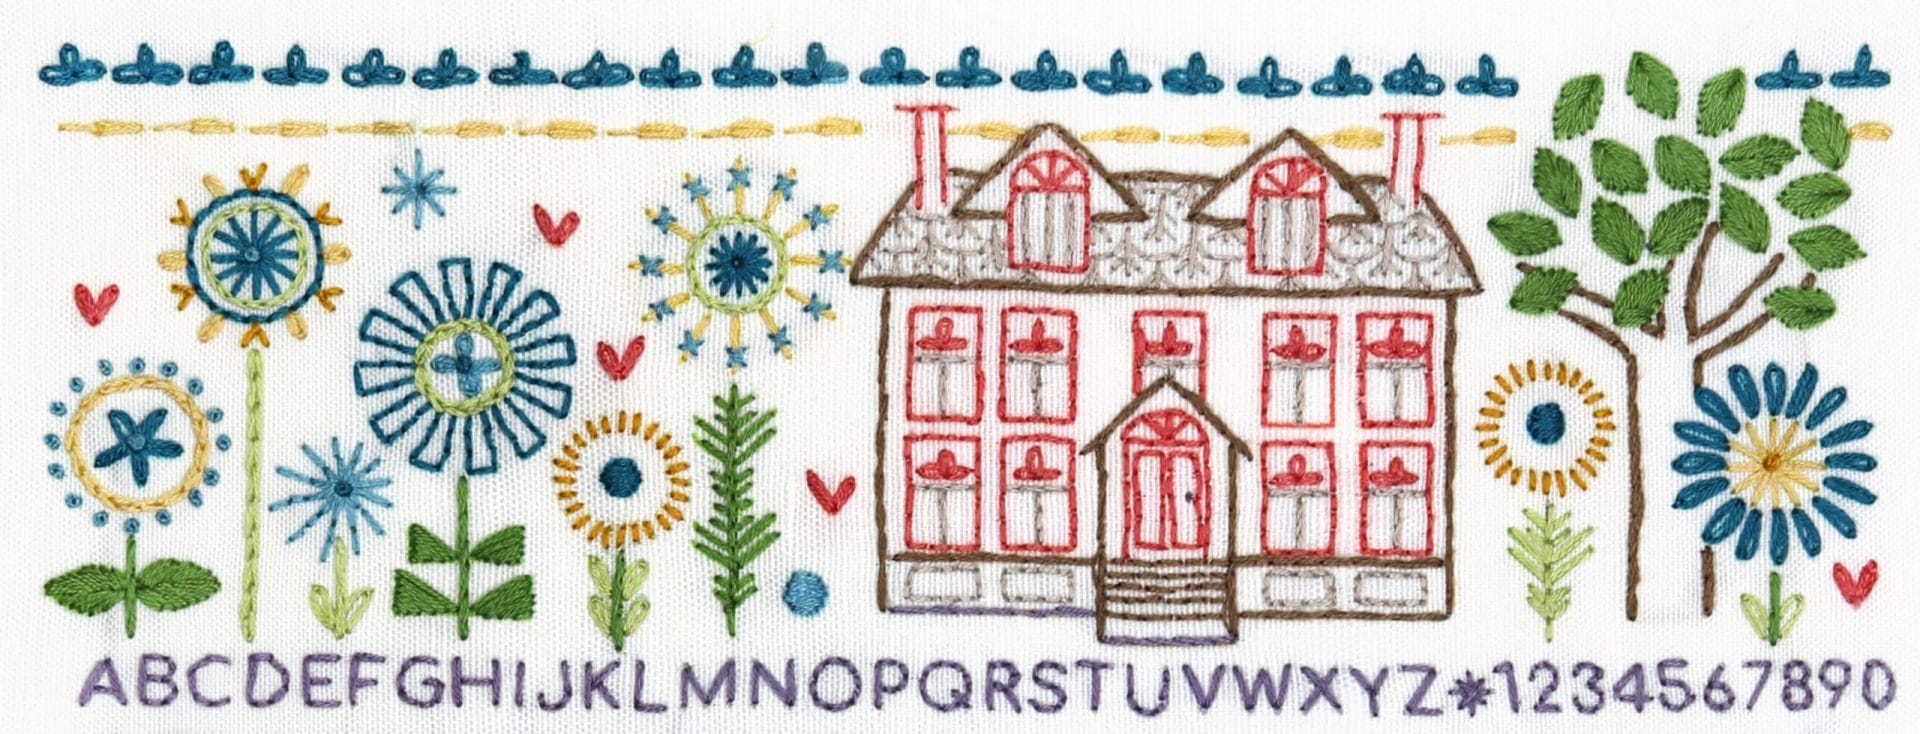 Embroidered detail from traditional embroidery stitch sampler with home themes